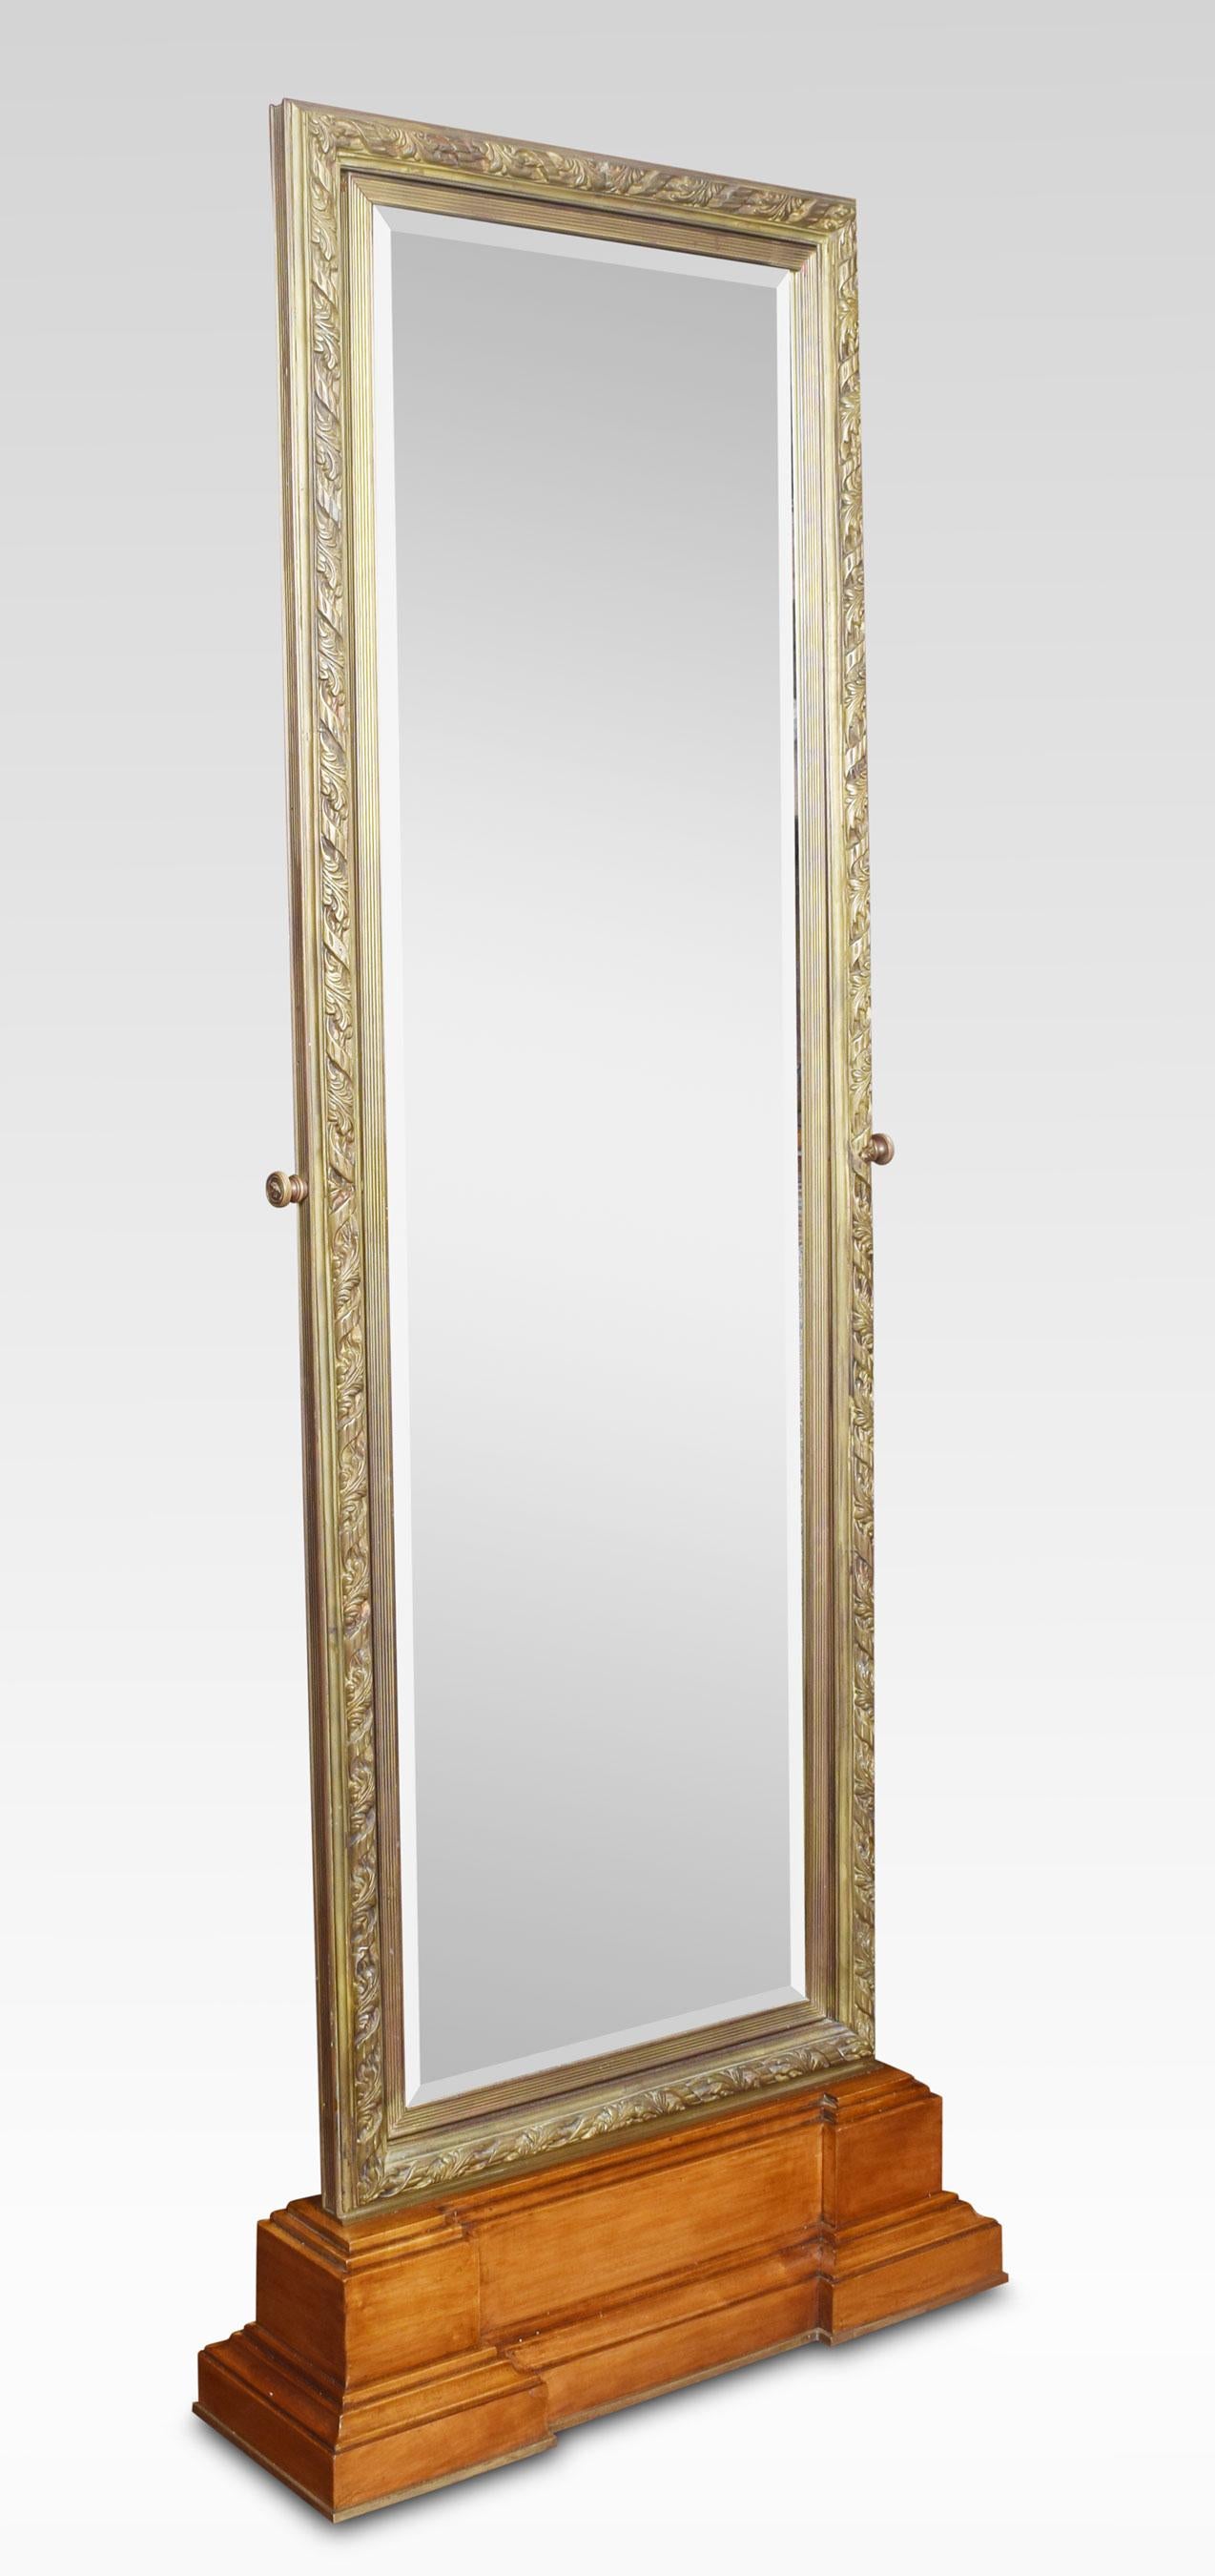 Large tooled bronze framed two-sided cheval mirror, the rectangular tooled frame enclosing the original adjustable double plate mirror. The stepped walnut base.
Dimensions
Height 77.5 inches
Width 30 inches
Depth 9 inches.